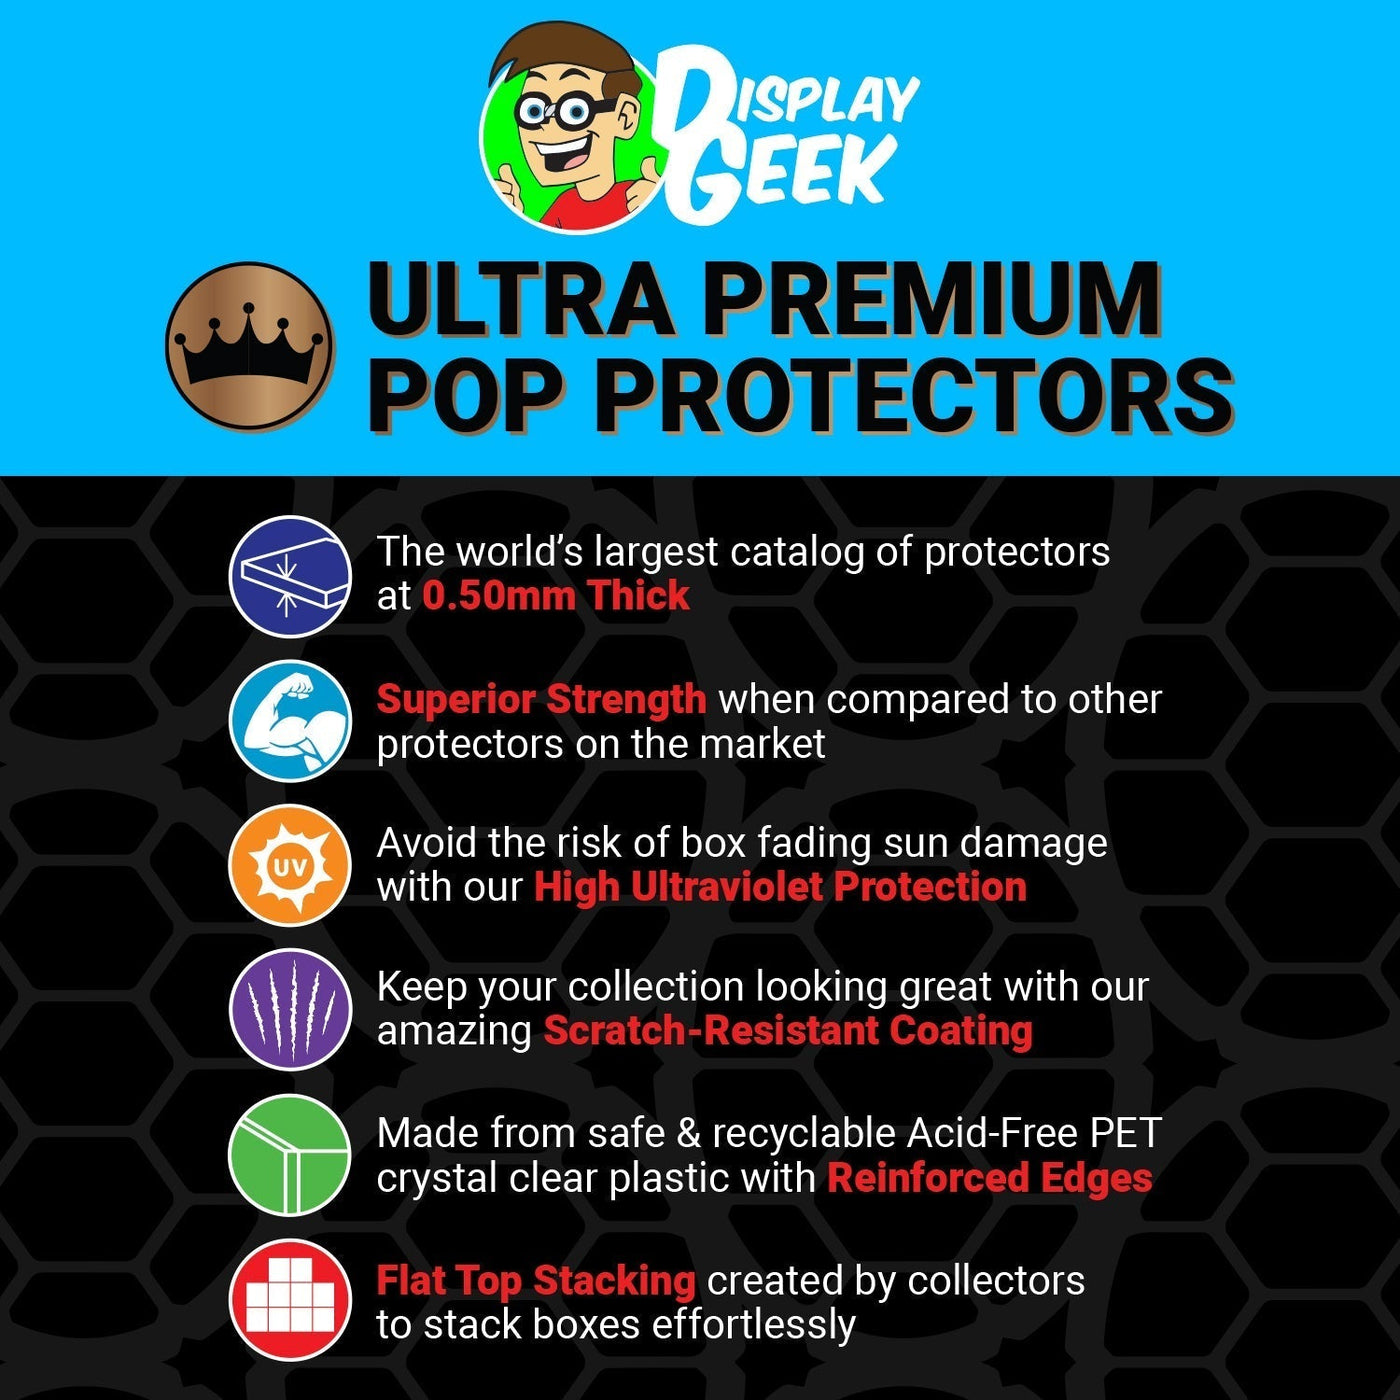 Pop Protector for Vynl 2 Pack Rex & Tricera Ops Funko on The Protector Guide App by Display Geek